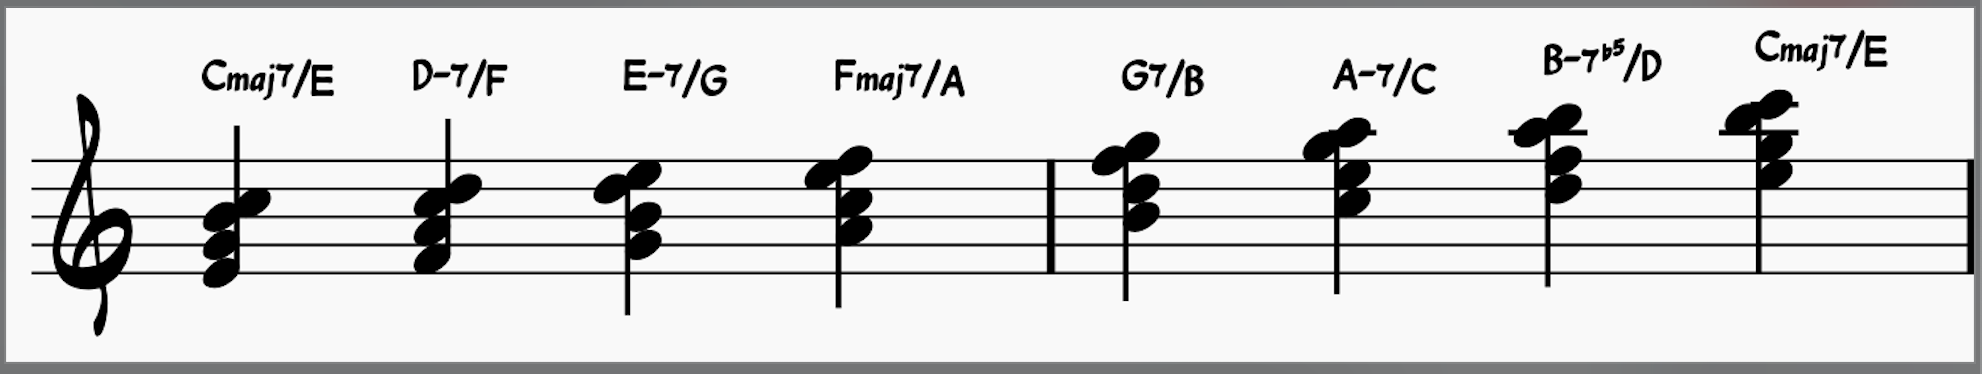 Piano chord inversions: C major chord scale in first inversion